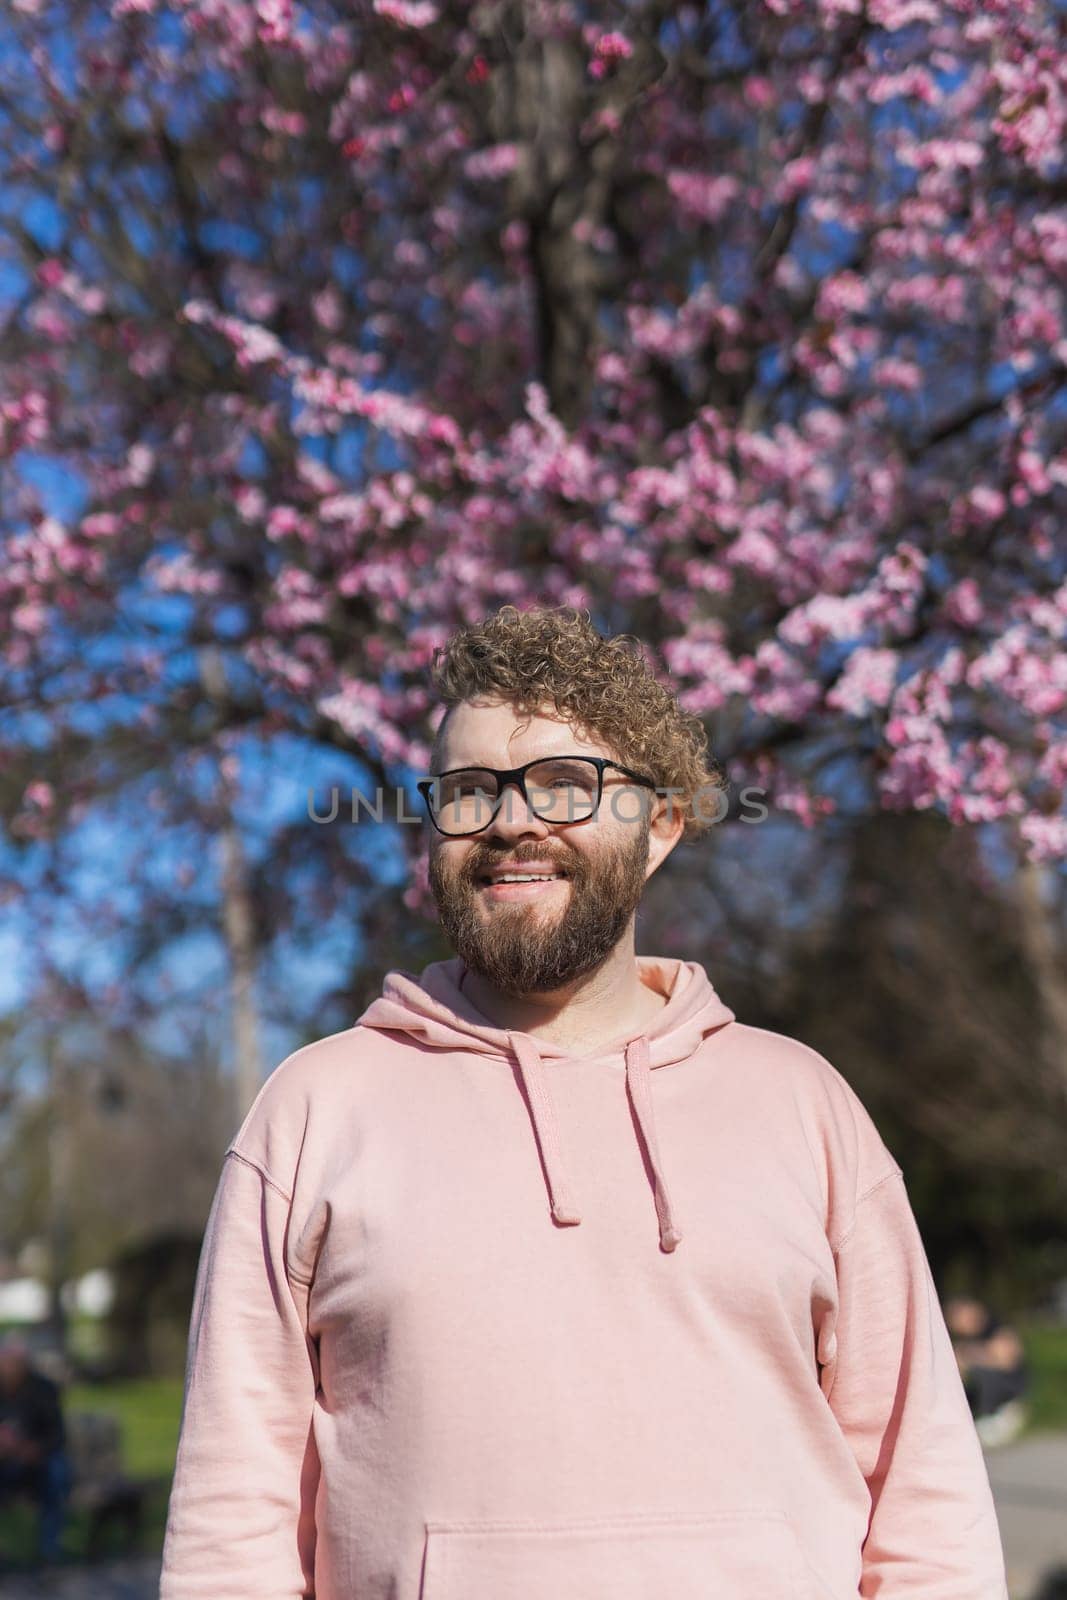 Man allergic enjoying after treatment from seasonal allergy at spring. Portrait of happy bearded man smiling in front of blossom tree at springtime. Spring blooming and allergy concept. Copy space, vertical.